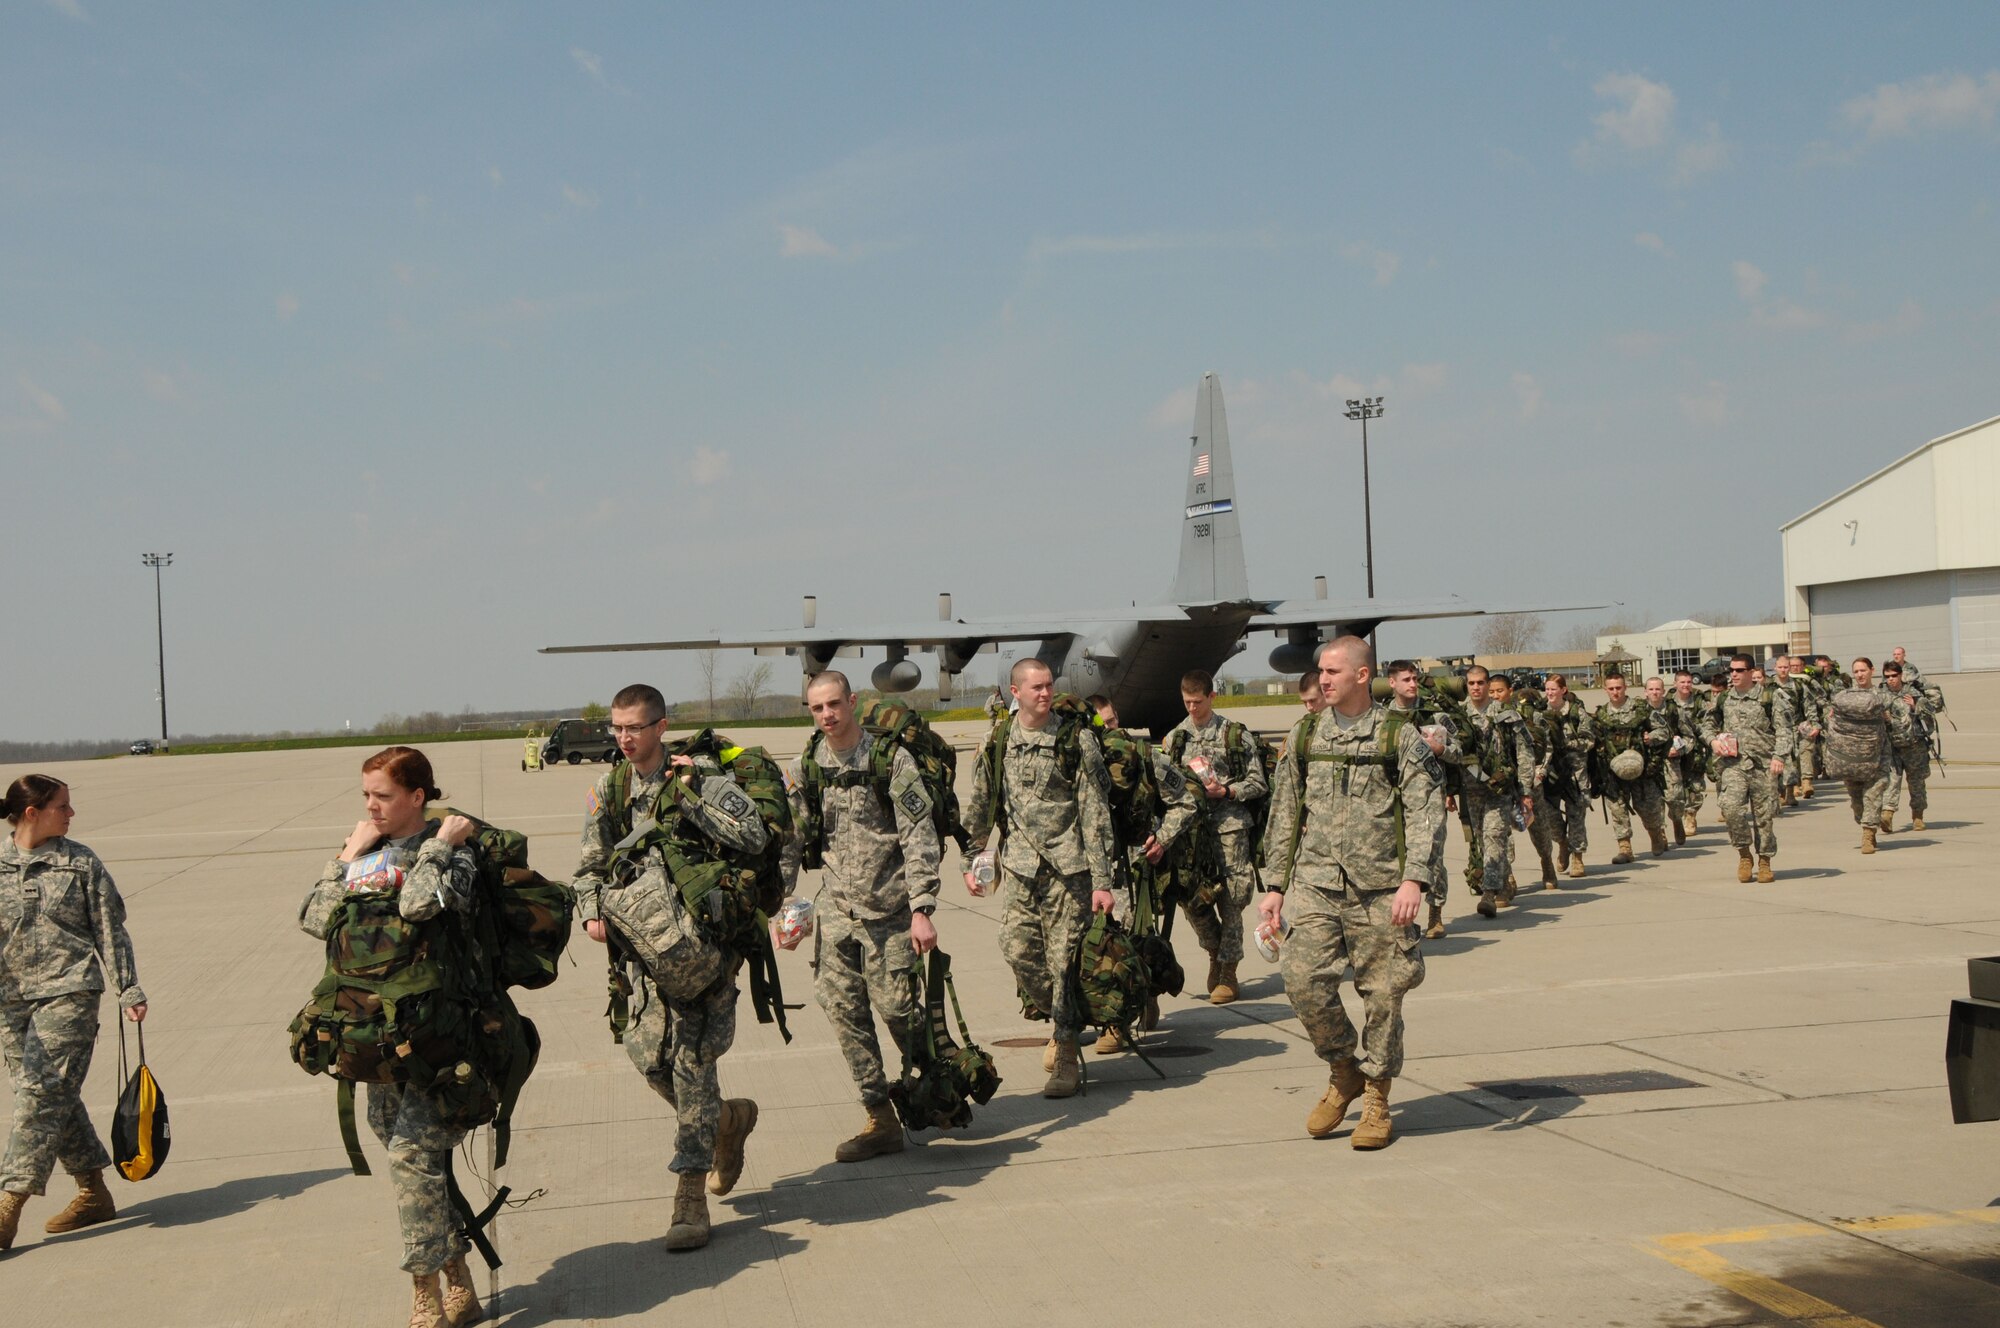 Canisius College Army ROTC Battalion Cadets march to the 107th Airlift Wing's C-130 aircraft for real world Army deployment training April 19, 2012 (U.S.Air Force Photo/Senior Master Sgt. Ray Lloyd)